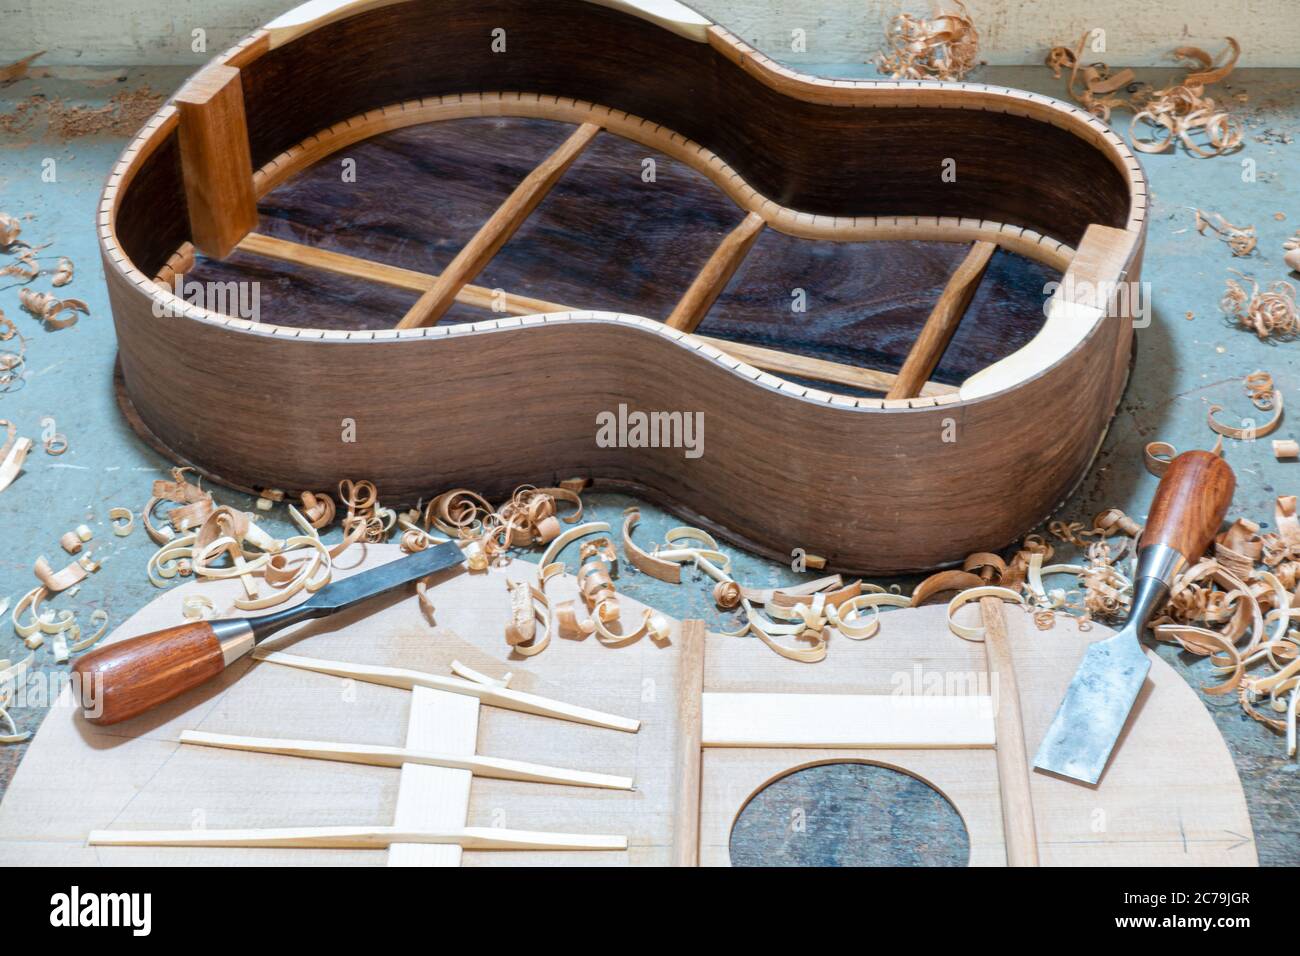 Luthier workbench with tools and an acoustic guitar under construction  Stock Photo - Alamy